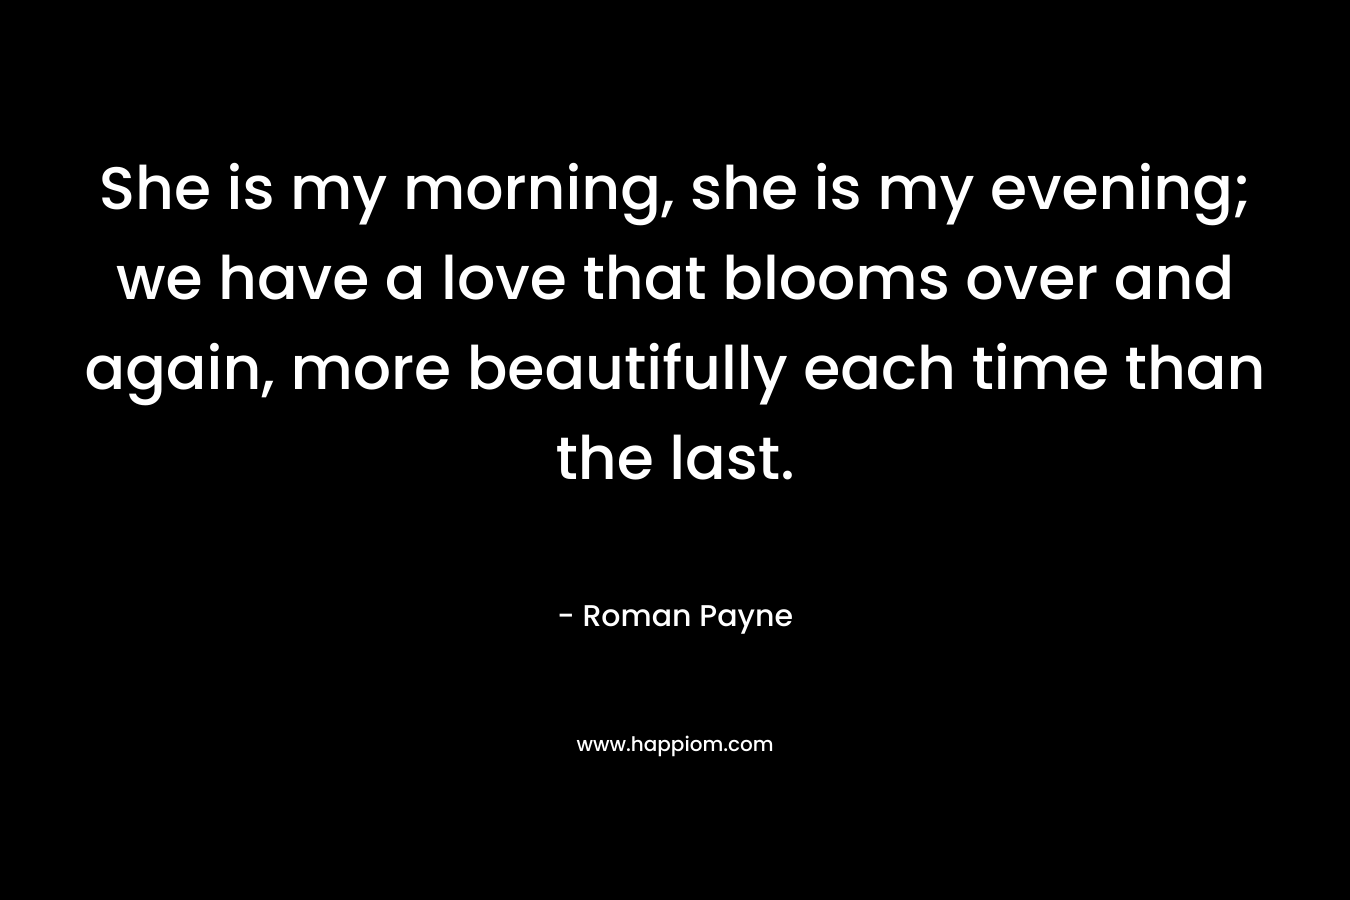 She is my morning, she is my evening; we have a love that blooms over and again, more beautifully each time than the last.